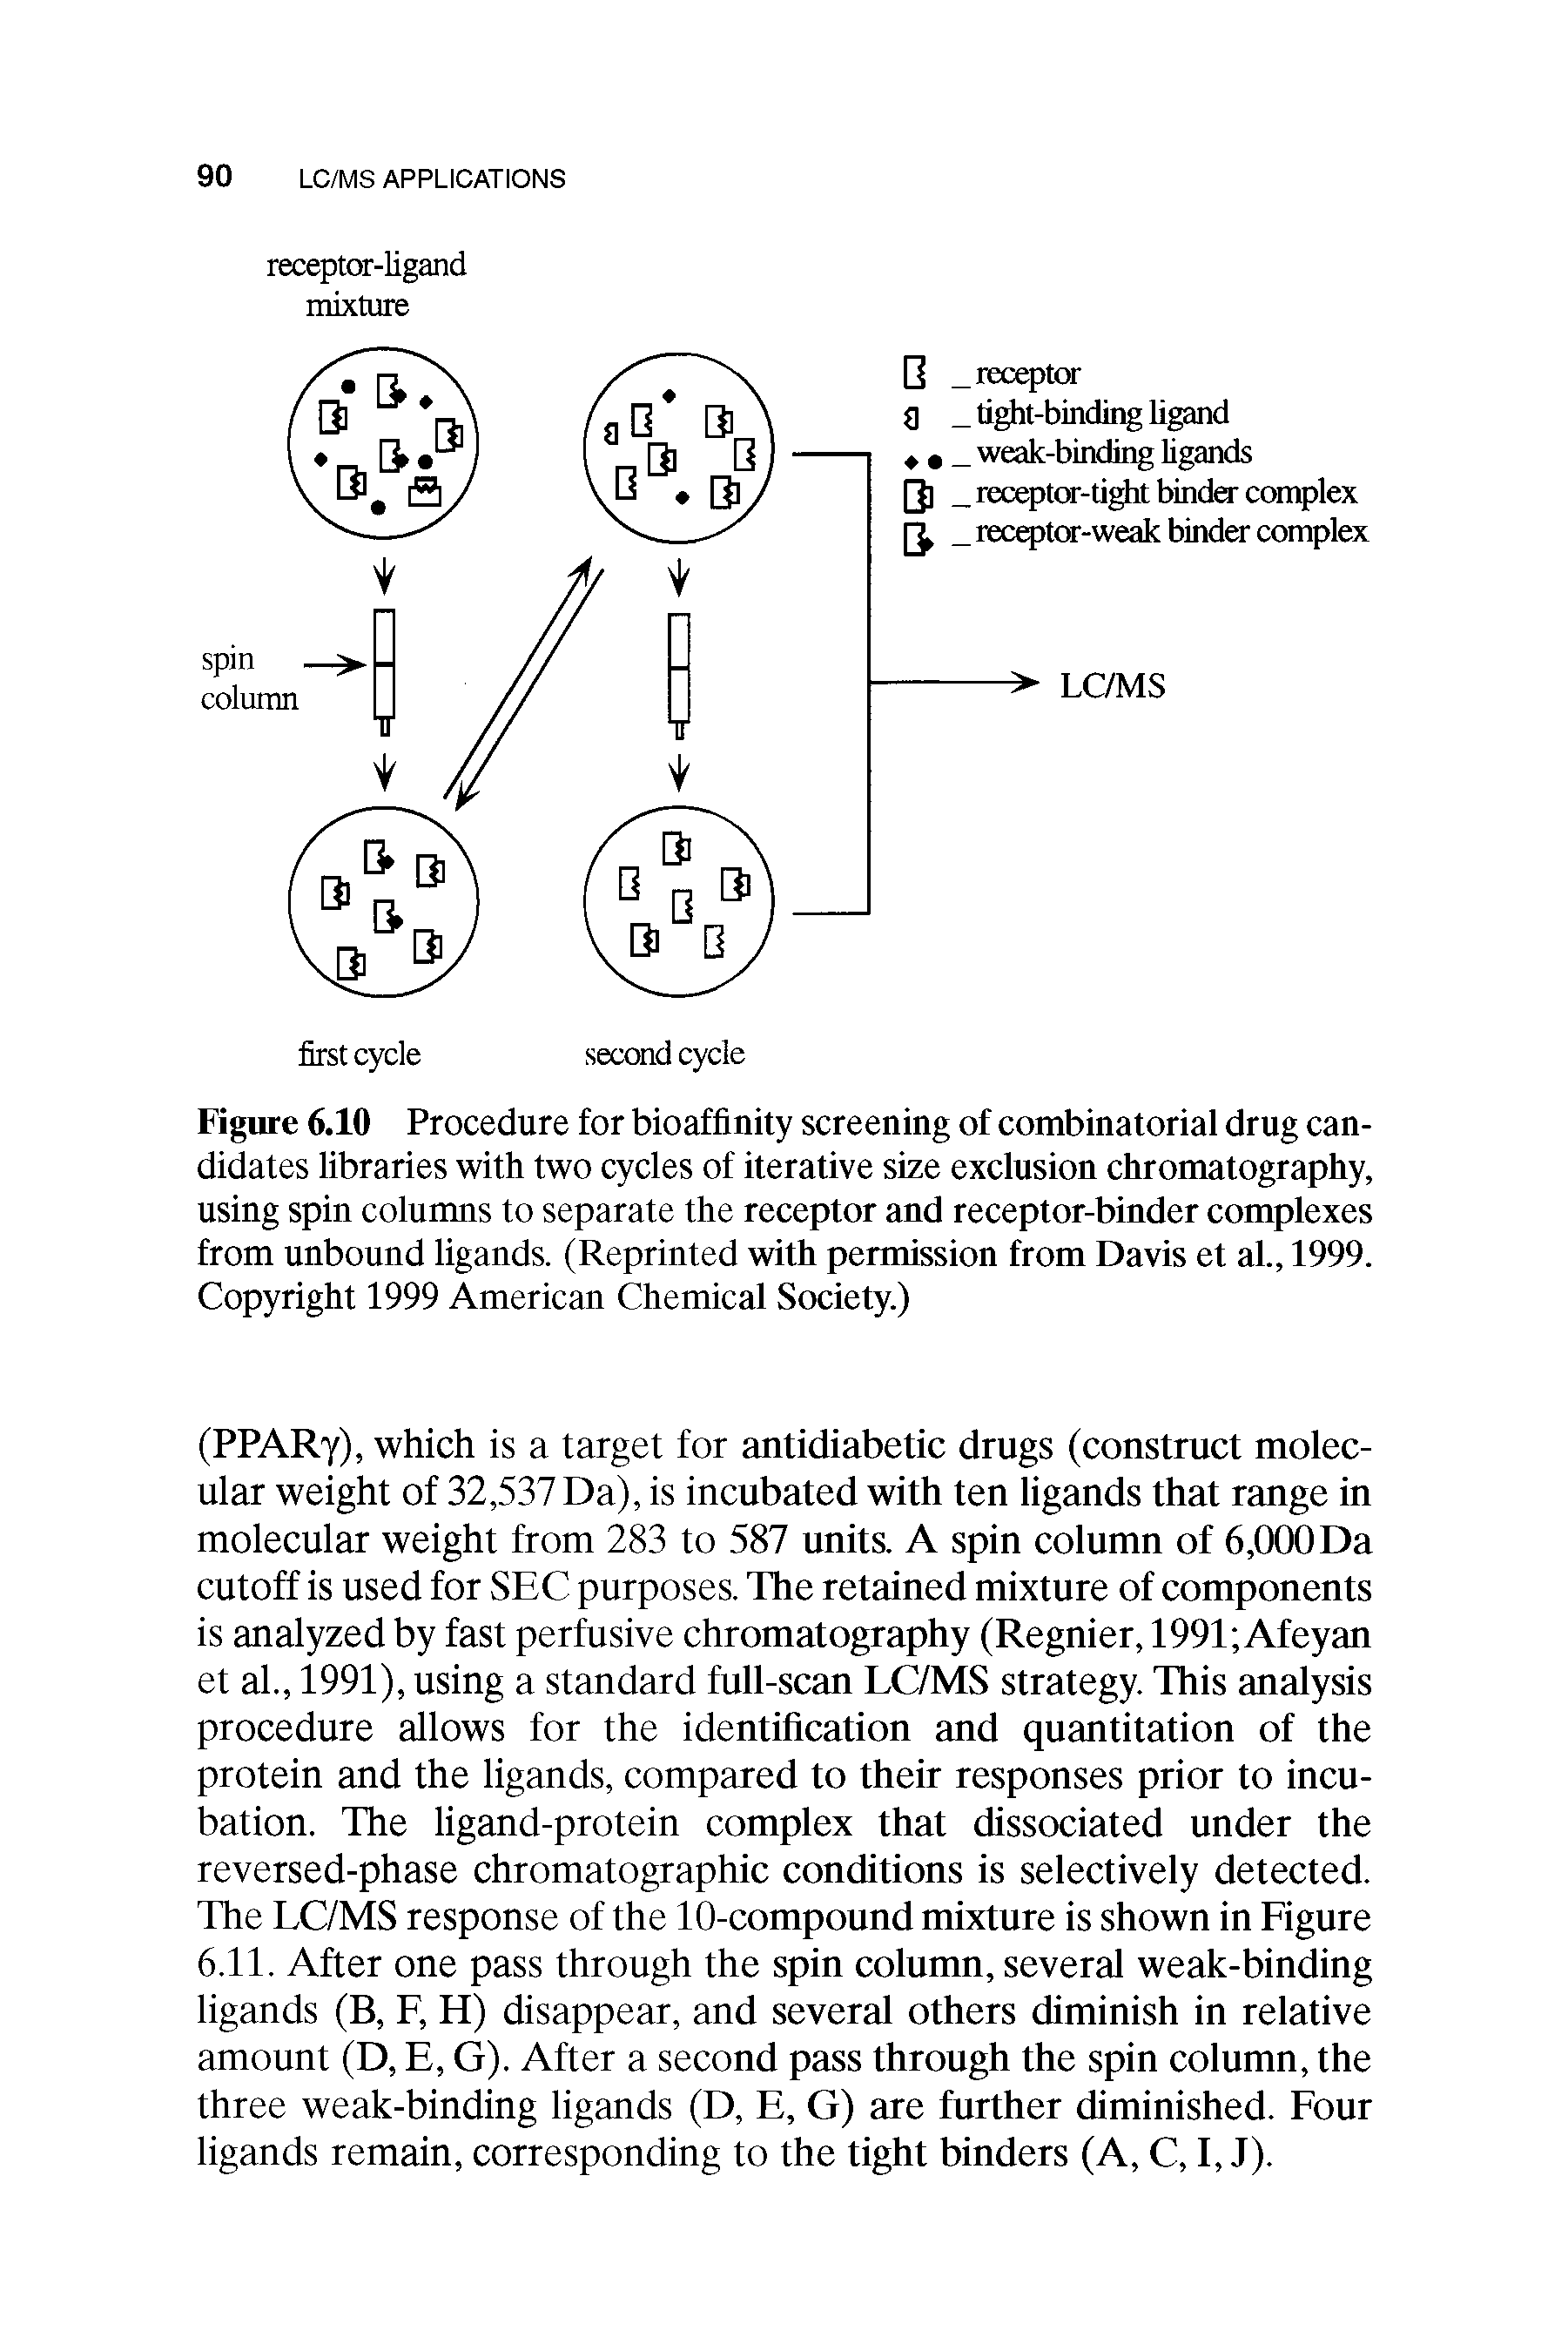 Figure 6.10 Procedure for bioaffinity screening of combinatorial drug candidates libraries with two cycles of iterative size exclusion chromatography, using spin columns to separate the receptor and receptor-binder complexes from unbound ligands. (Reprinted with permission from Davis et al., 1999. Copyright 1999 American Chemical Society.)...